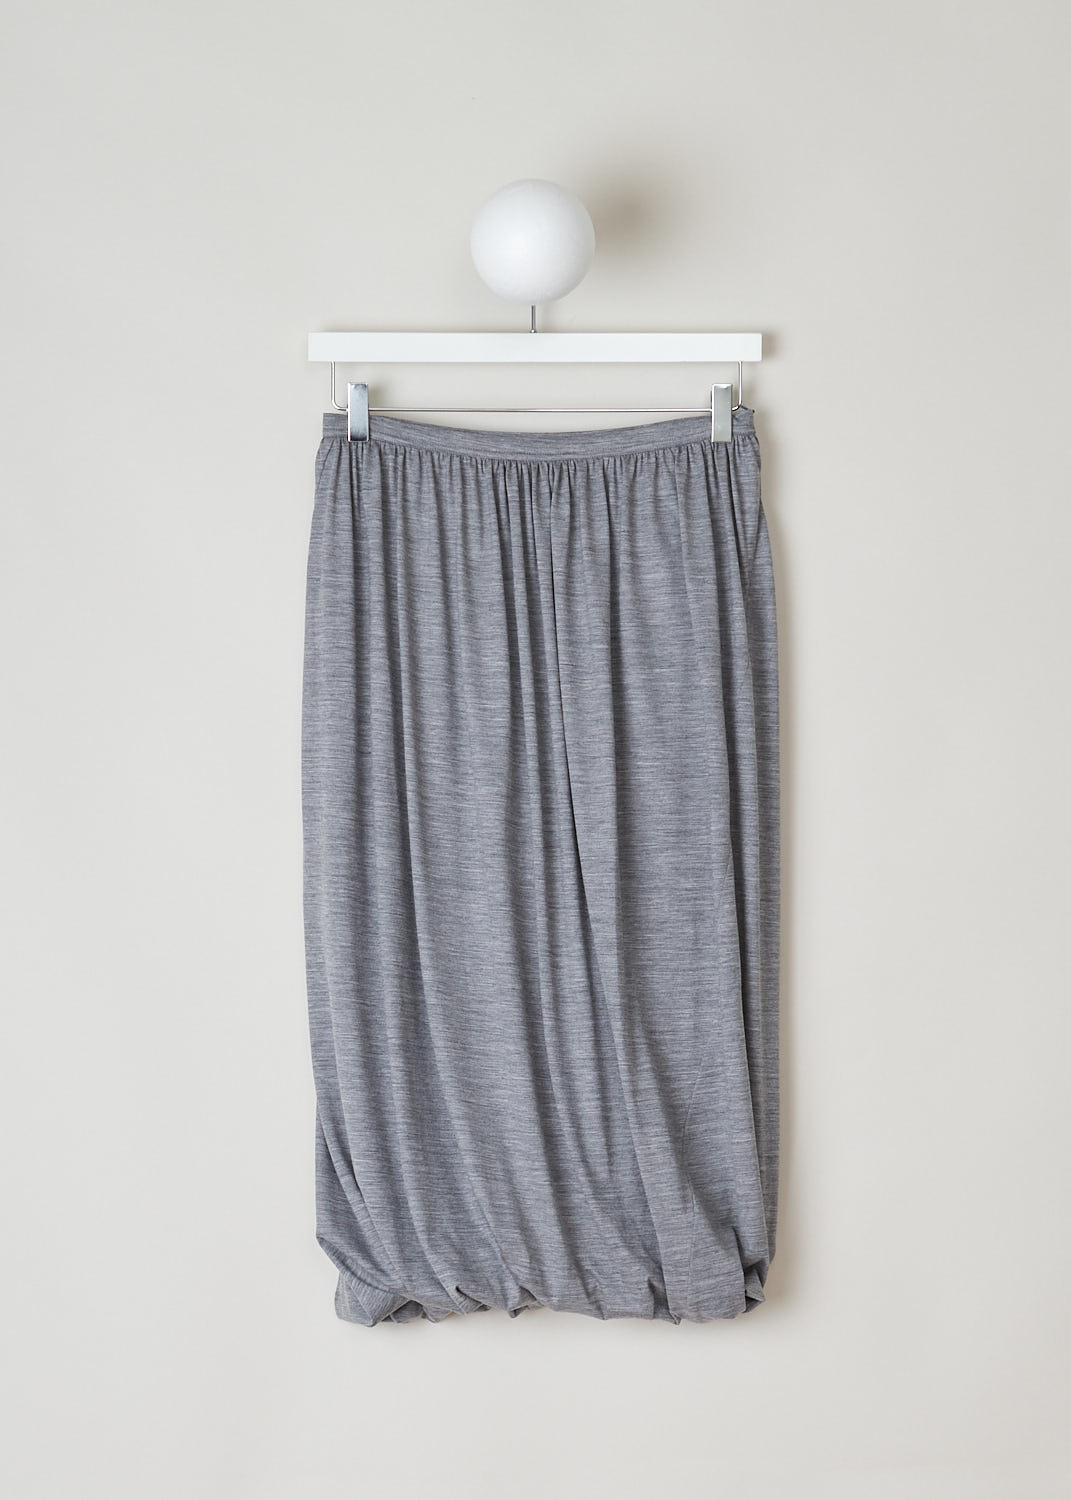 SOFIE Dâ€™HOORE, HEATHER GREY BALLOON SKIRT, SAOLA_WOJE_LIGHT_GREY_MELA, Grey, Front, This twisted balloon skirt in heather grey features a concealed side zip. A single side pocket can be found concealed in the seam.
